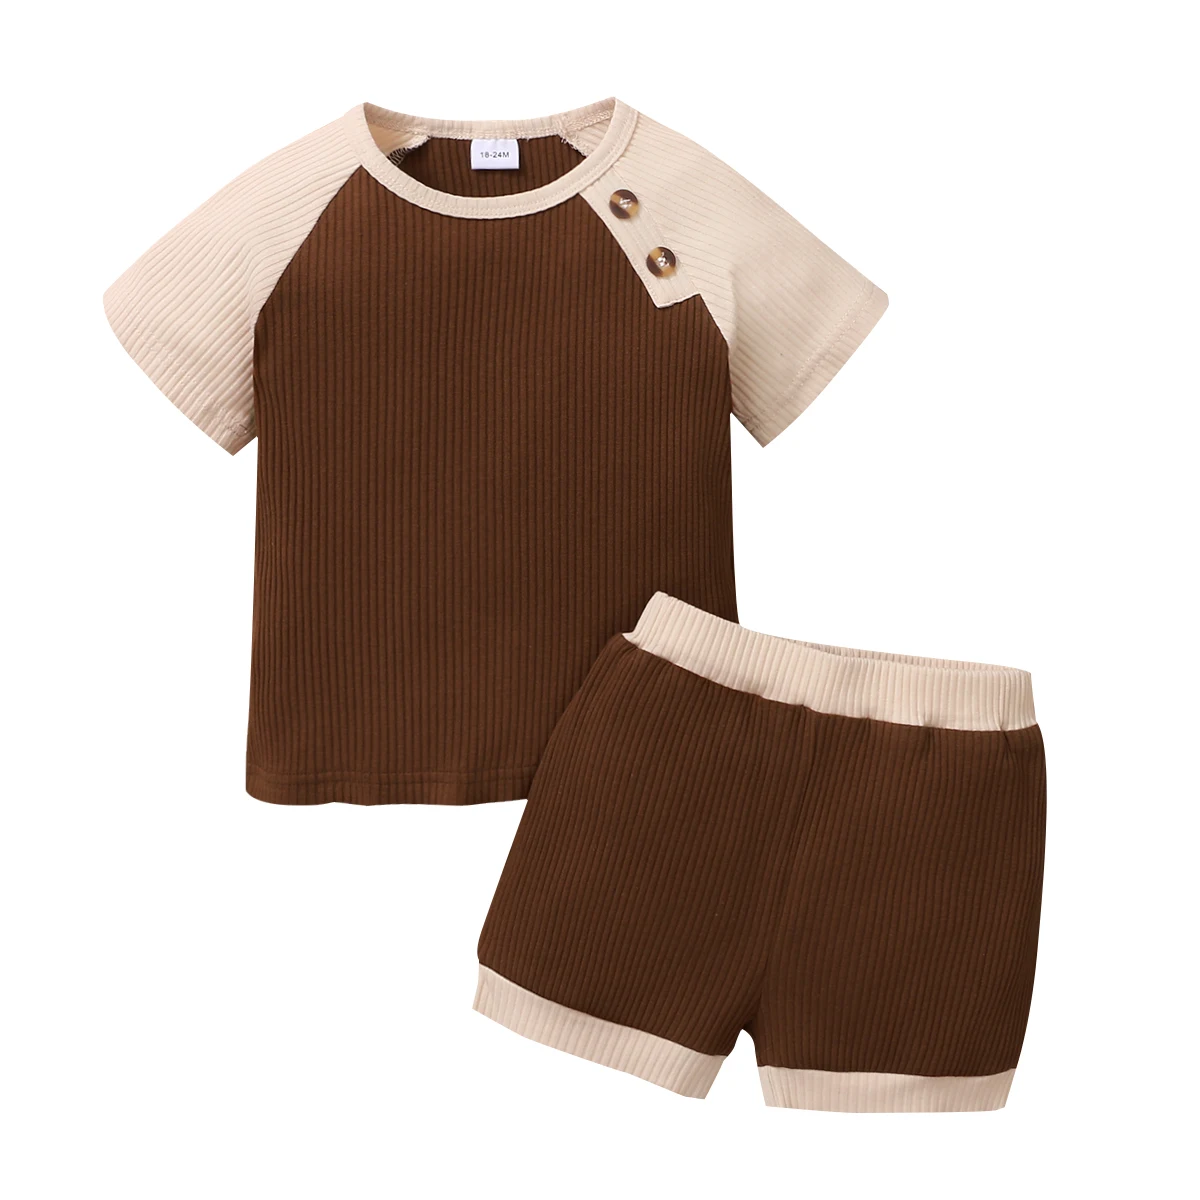 Kids Clothes Boys 5 to 6 years Knitted Toddler Boy Clothing Set Boys Boutique Clothing 2022 Summer Baby Boys Clothes Set